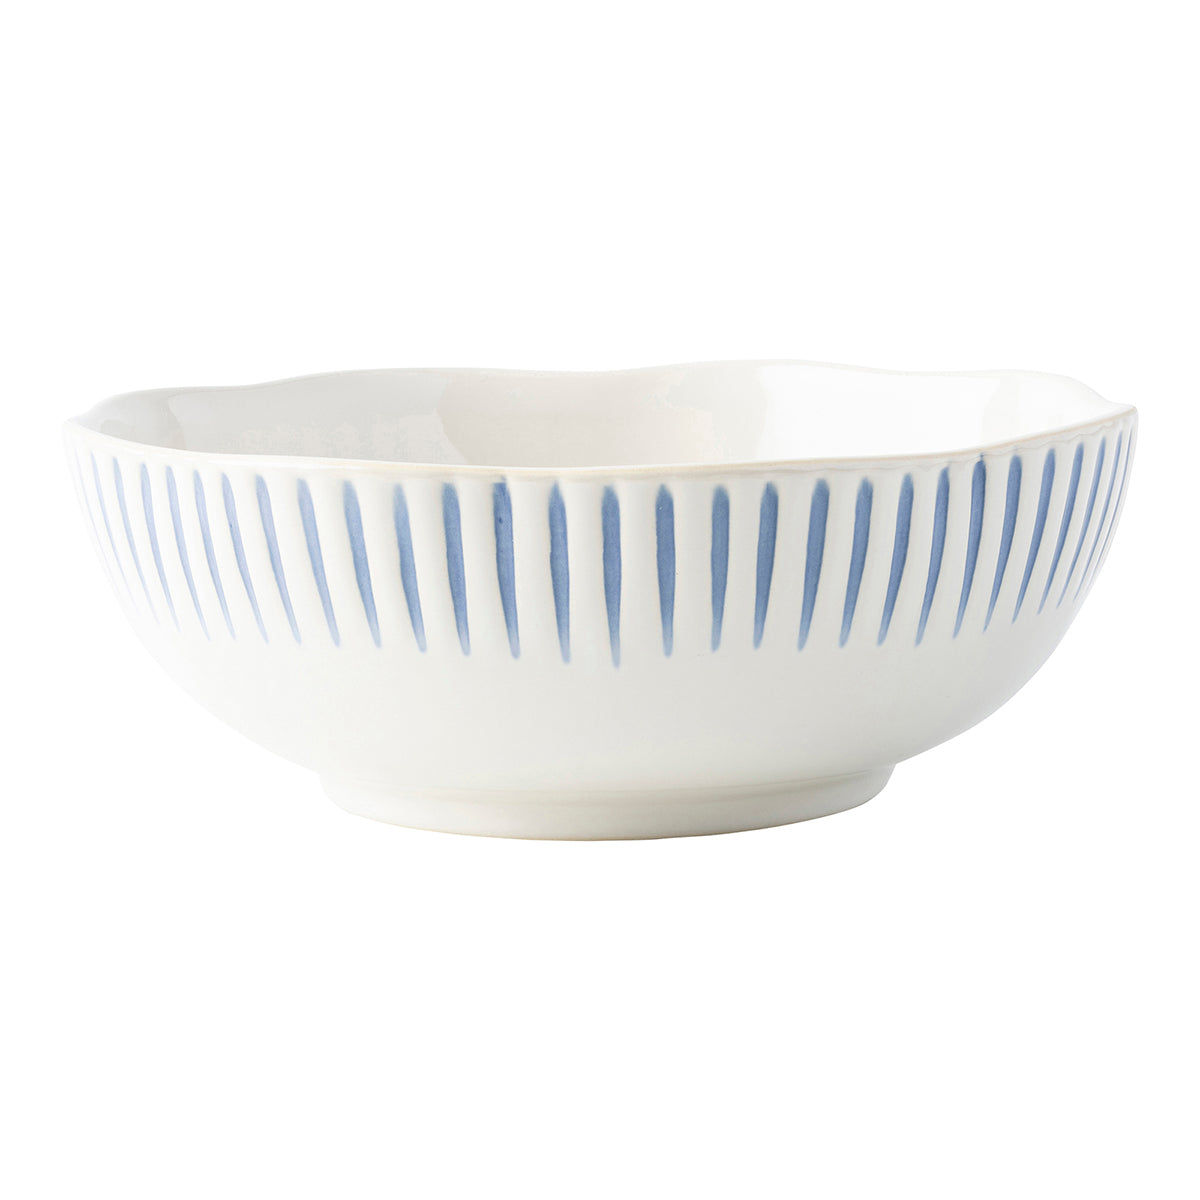 Equally stunning and simplistic, radiant stripes in breezy shades of blue adorn this dinnerware collection. With a wide mouth and shallow depth, this coupe shape bowl is perfect for grains, pasta or entree salads.